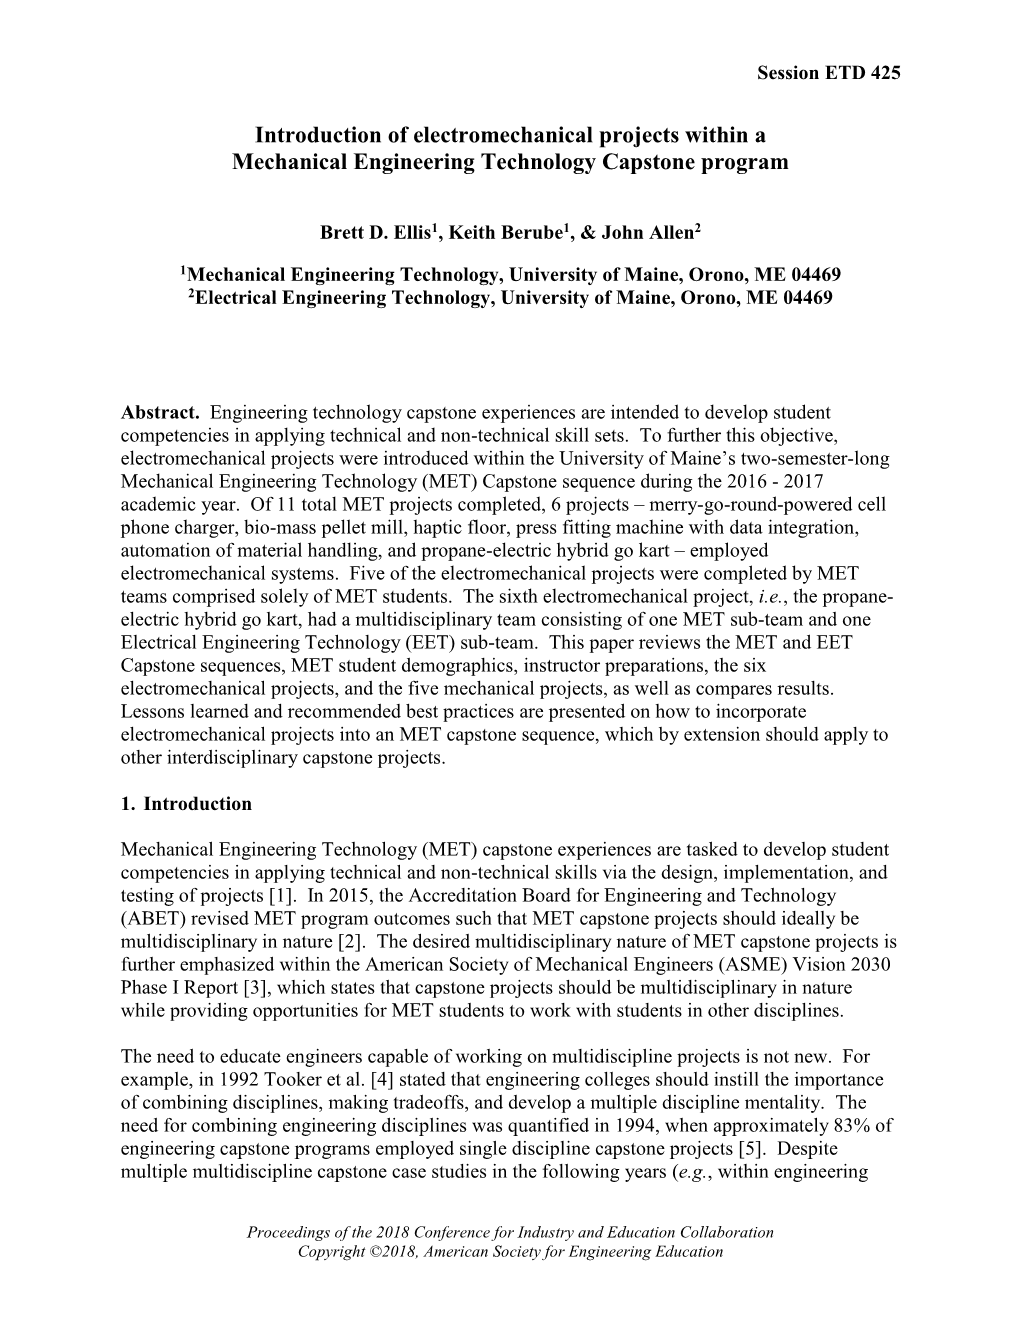 Introduction of Electromechanical Projects Within a Mechanical Engineering Technology Capstone Program